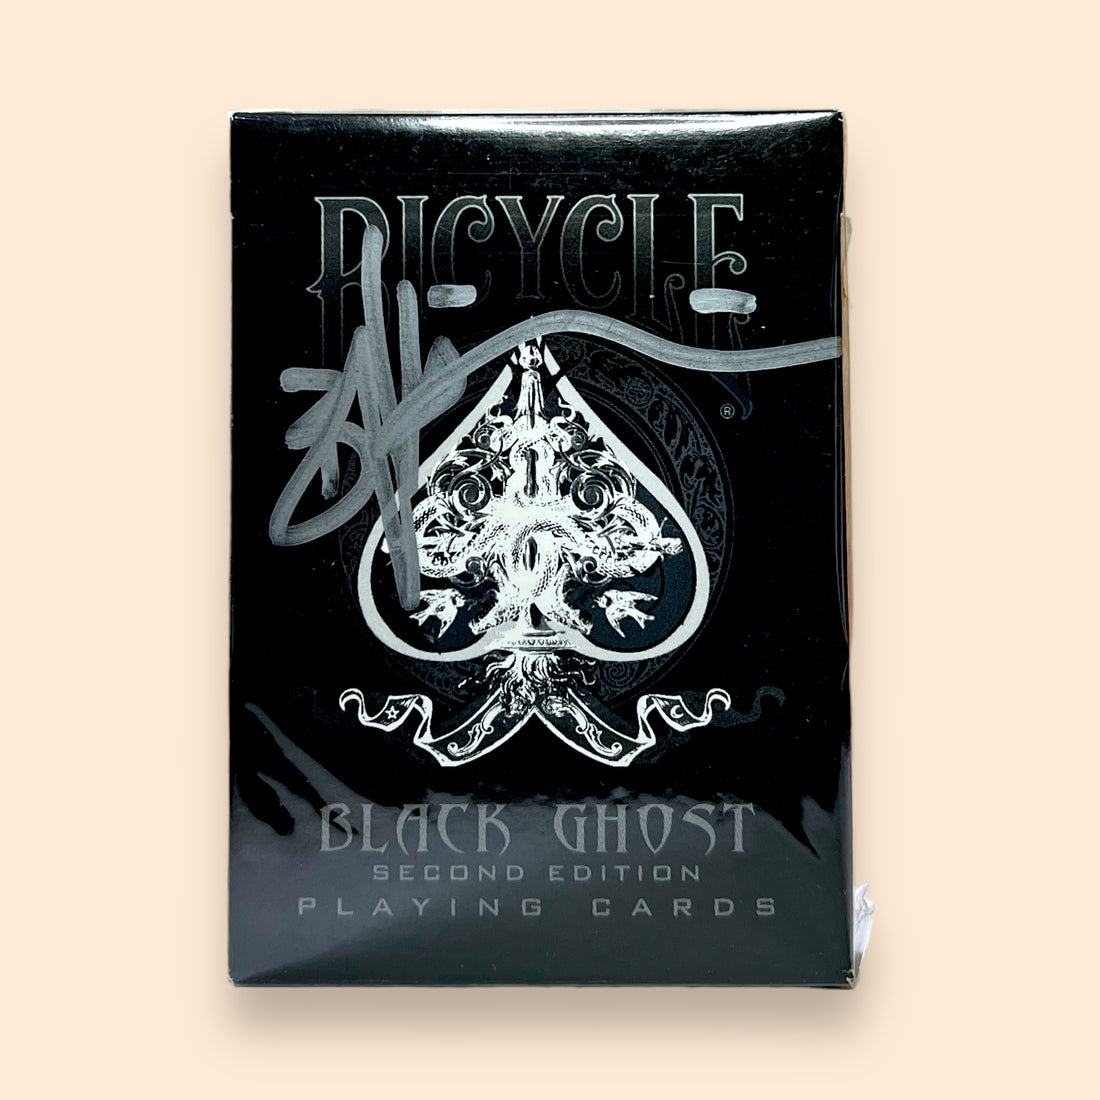 Bicycle Black Ghost Playing Cards Signed by Brad Christian